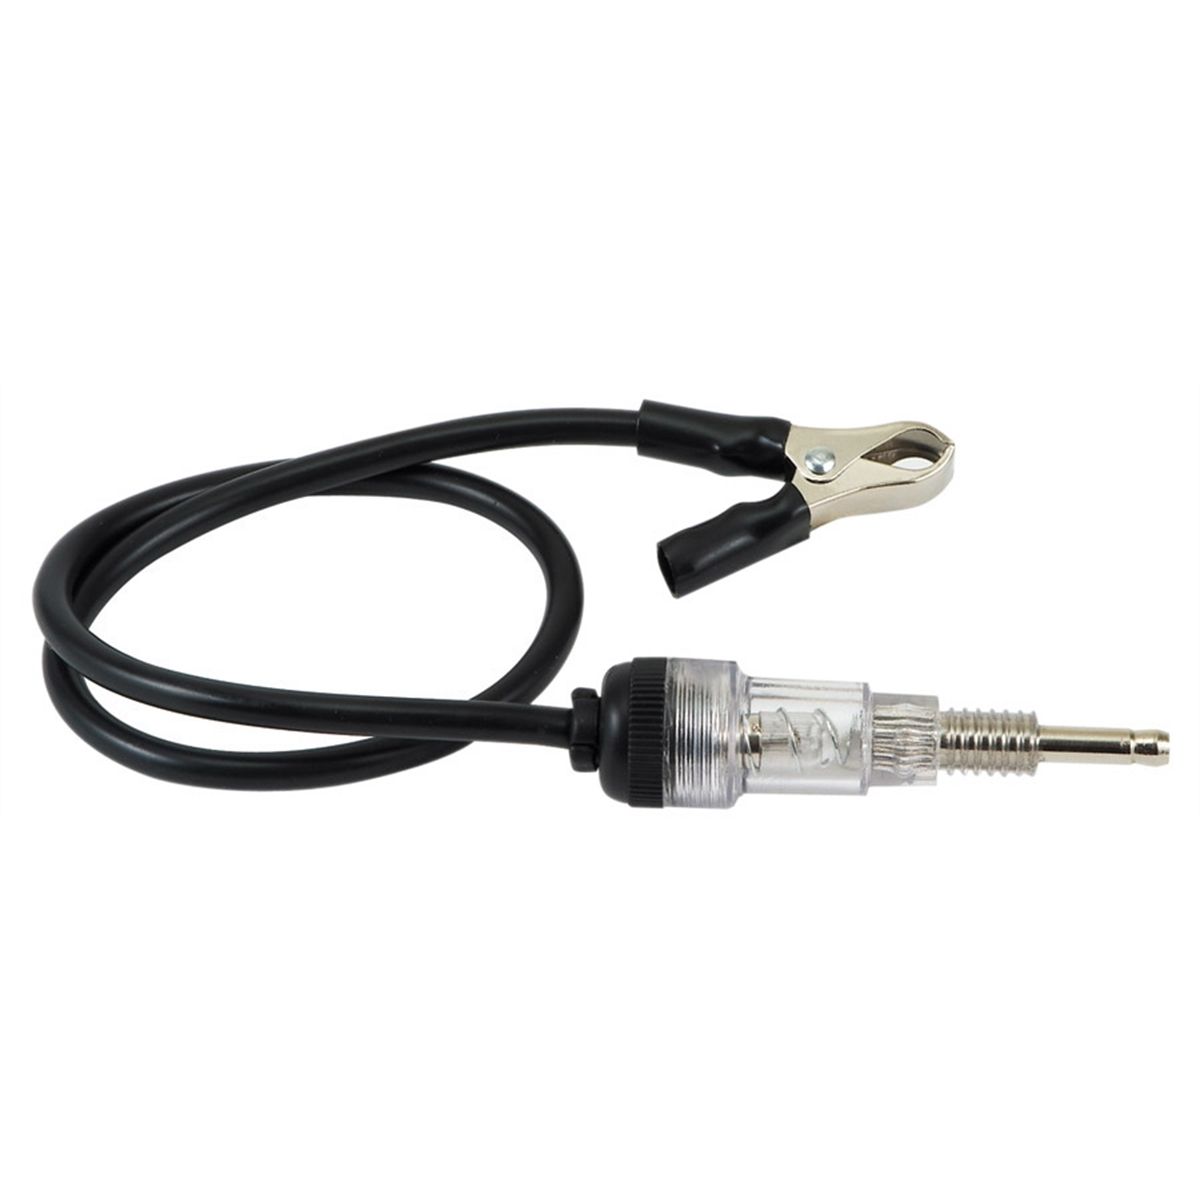 Rotary in-line ignition spark tester 32-9099 